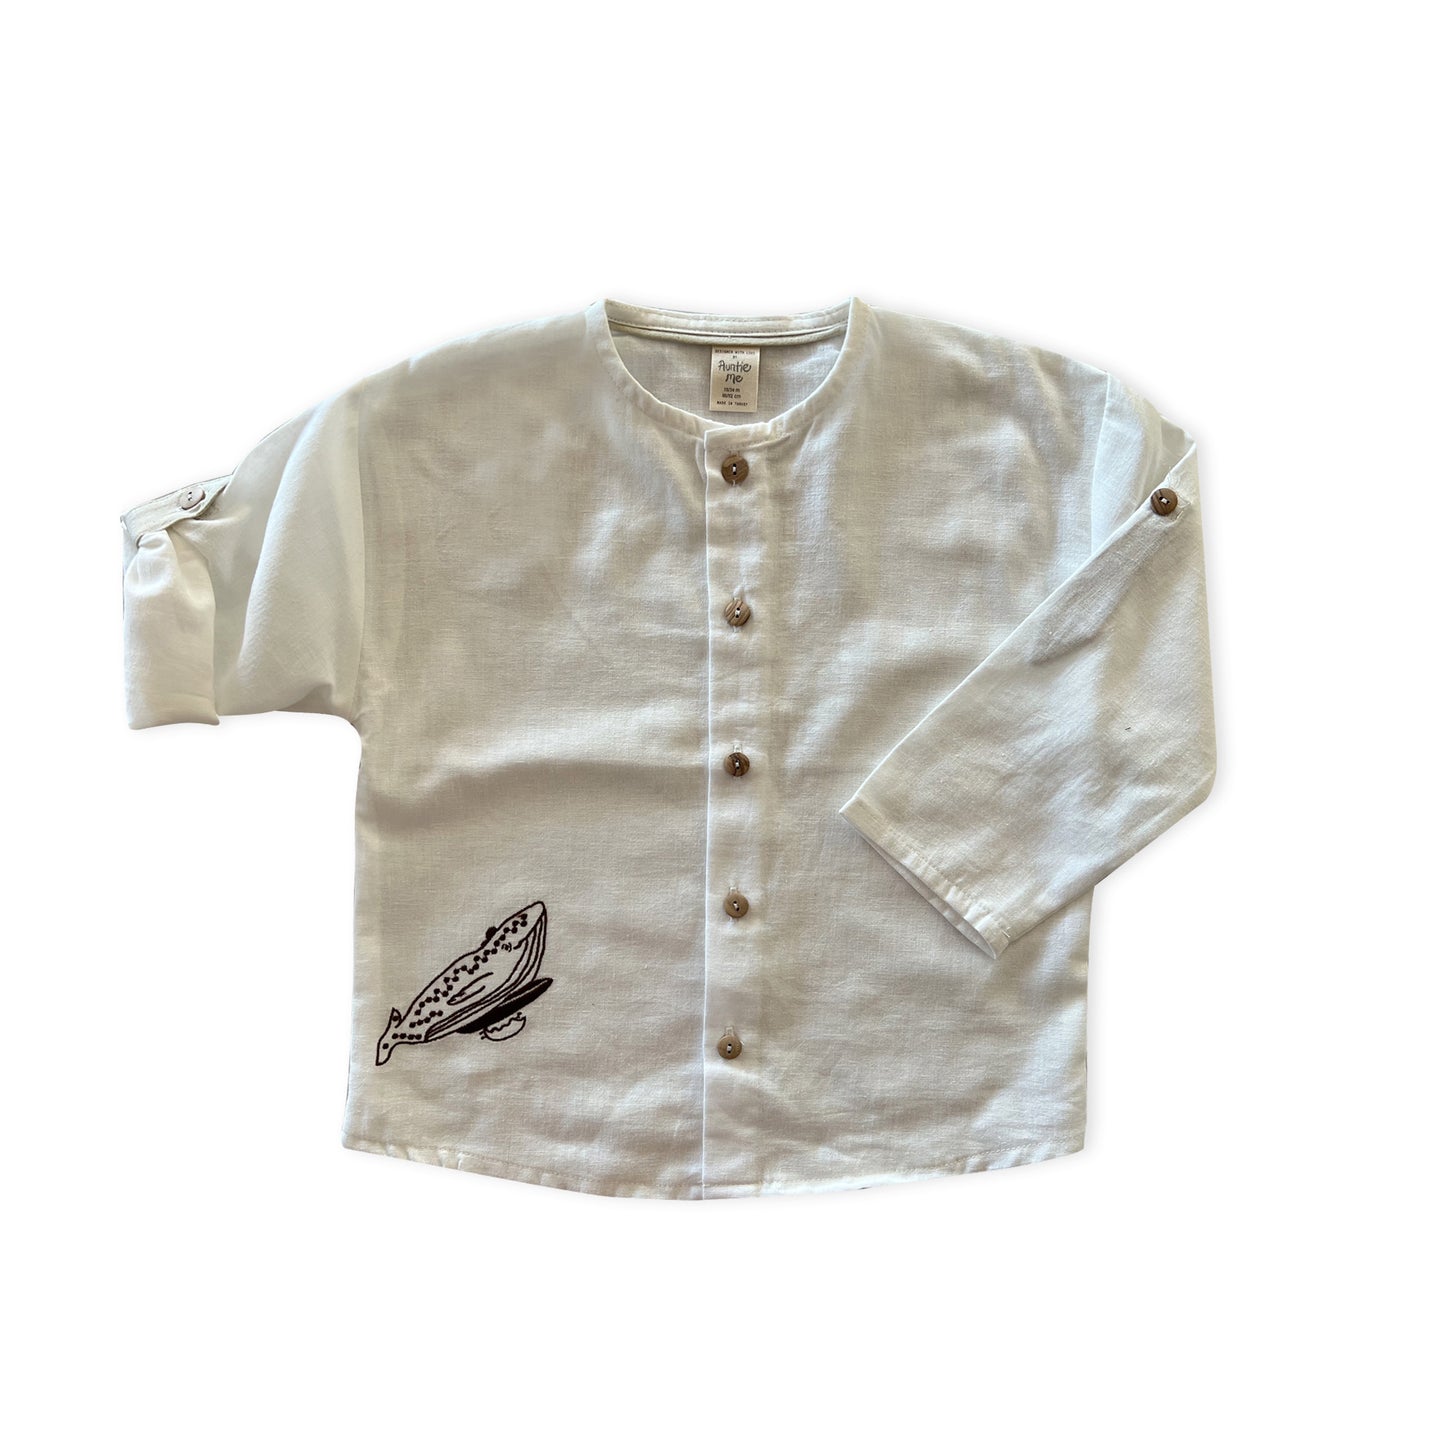 UNDYED ’SURFING WHALE’ SHIRT -Organic cotton and Linen